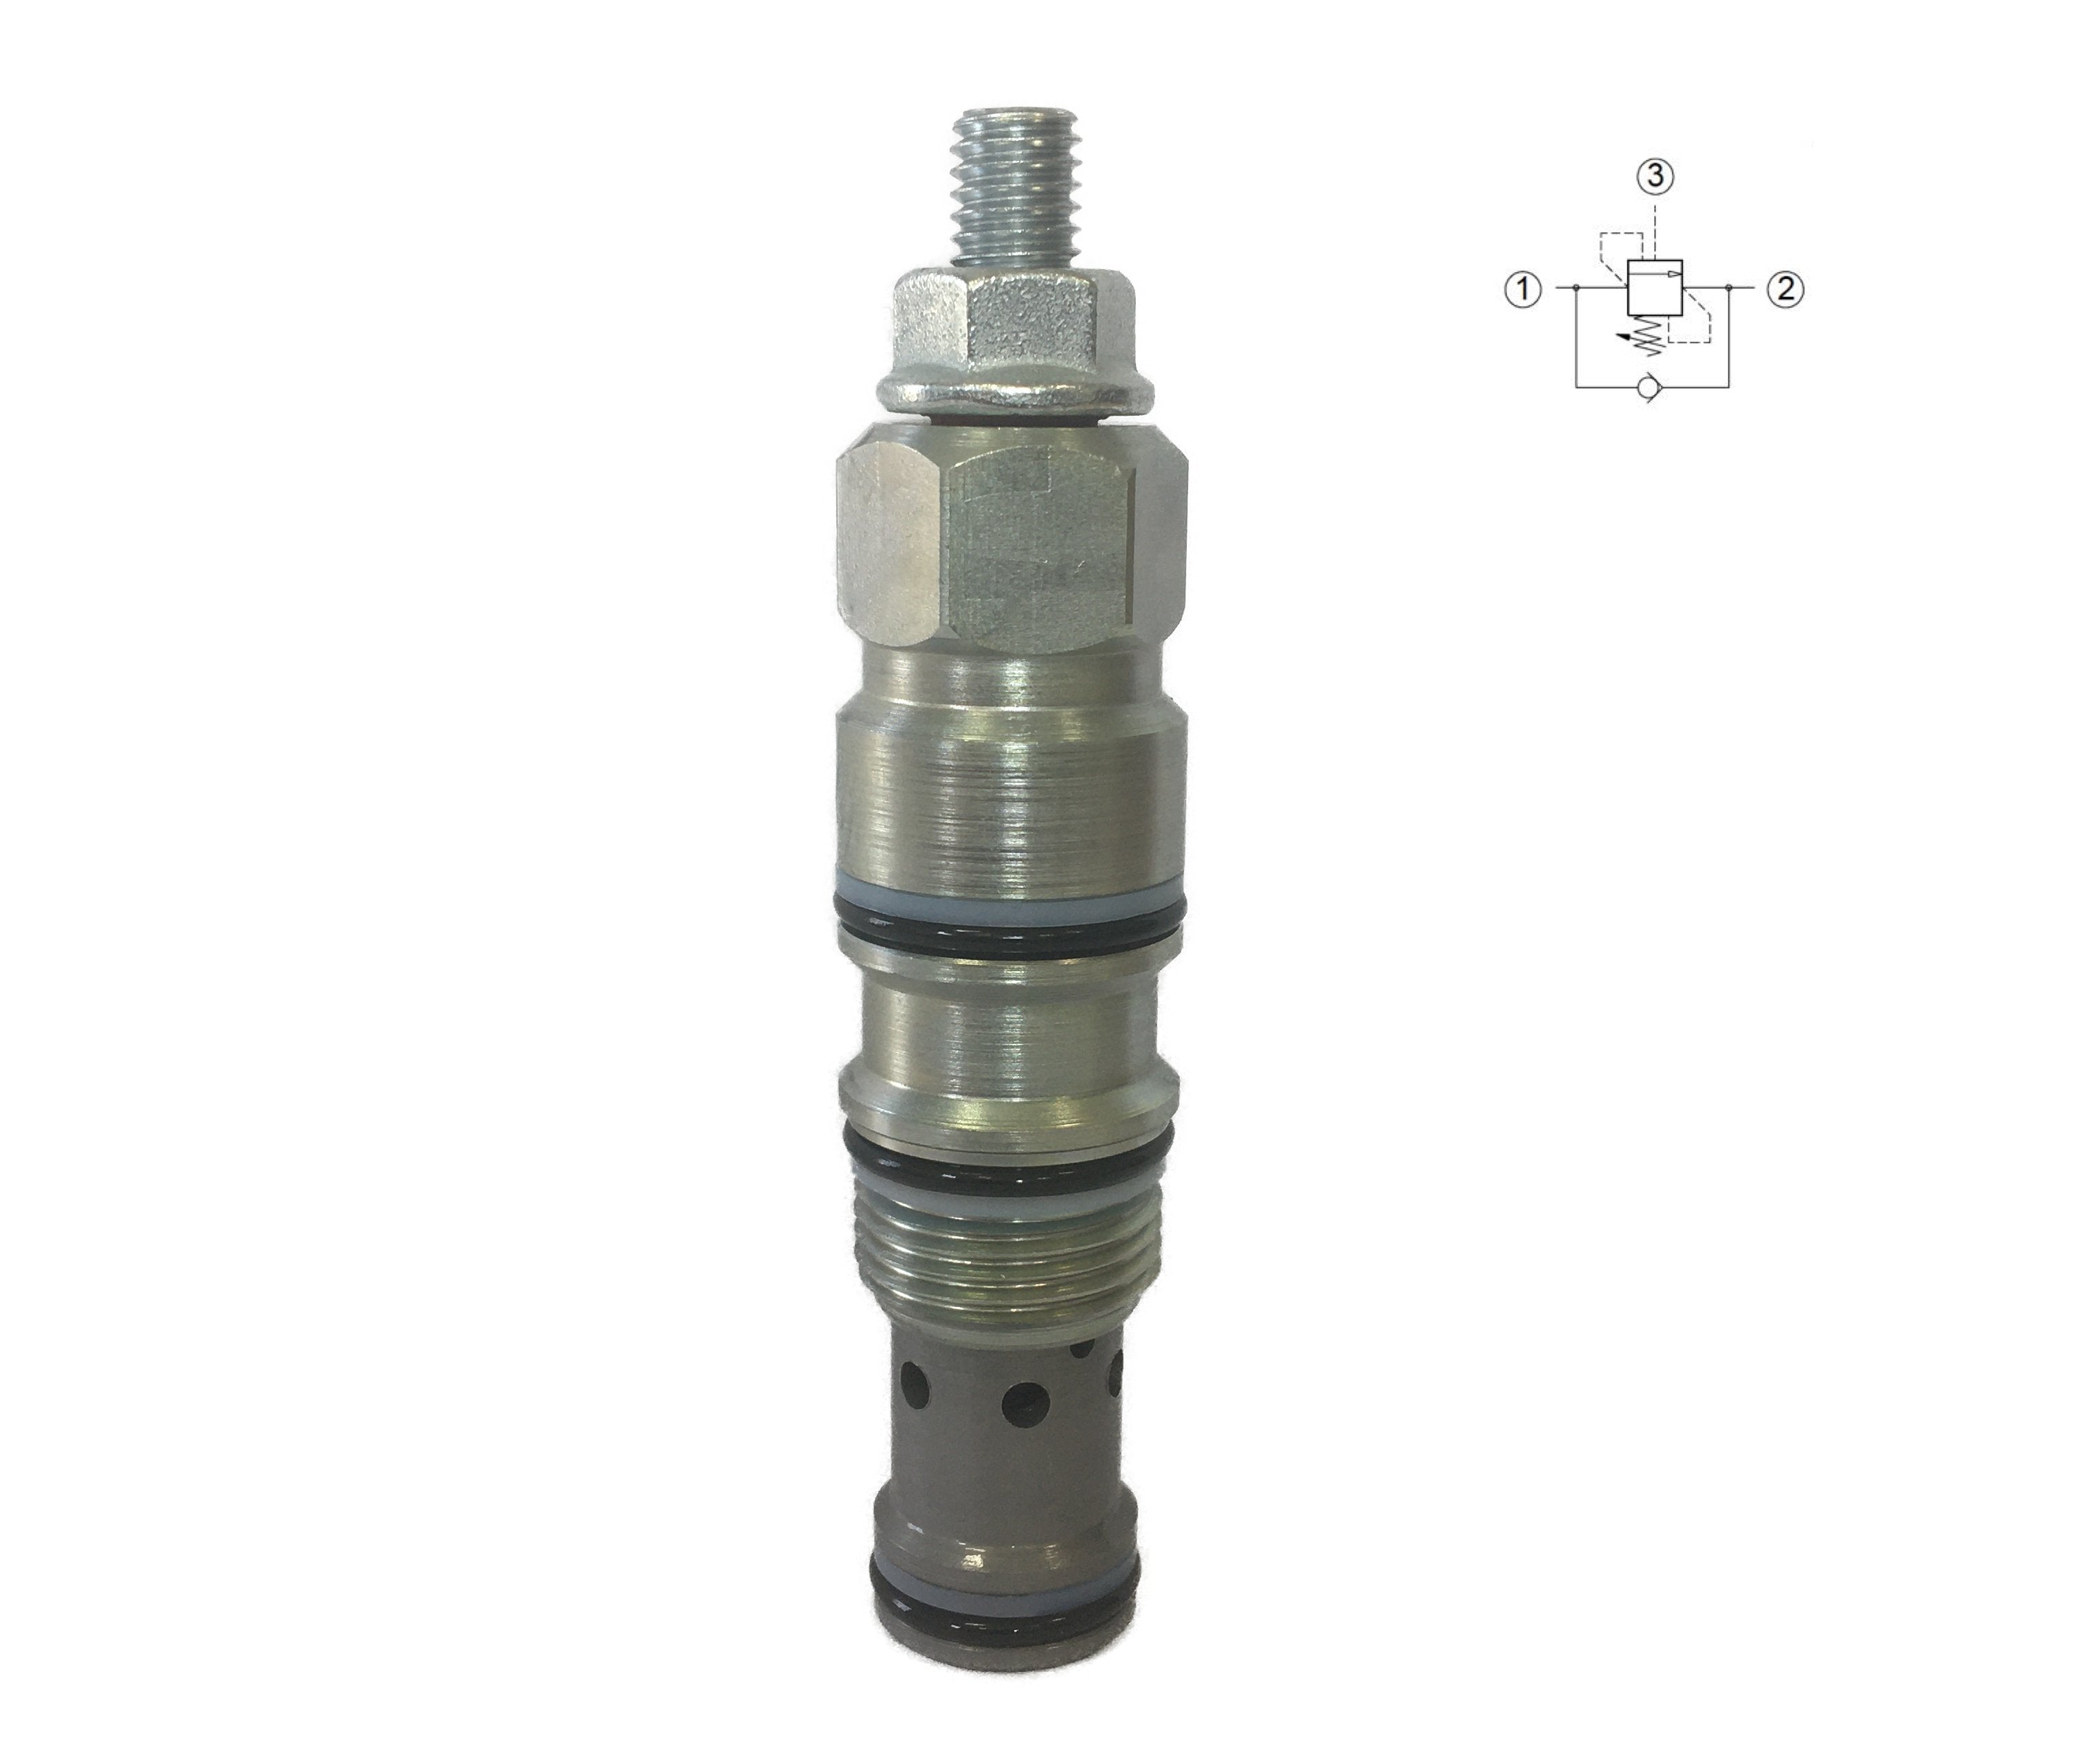 C200D210031100A : Valvole Counterbalance, 3:1, 20 GPM, 5000psi, 2030 to 3842psi adjustable, 3045psi Preset, T-11A